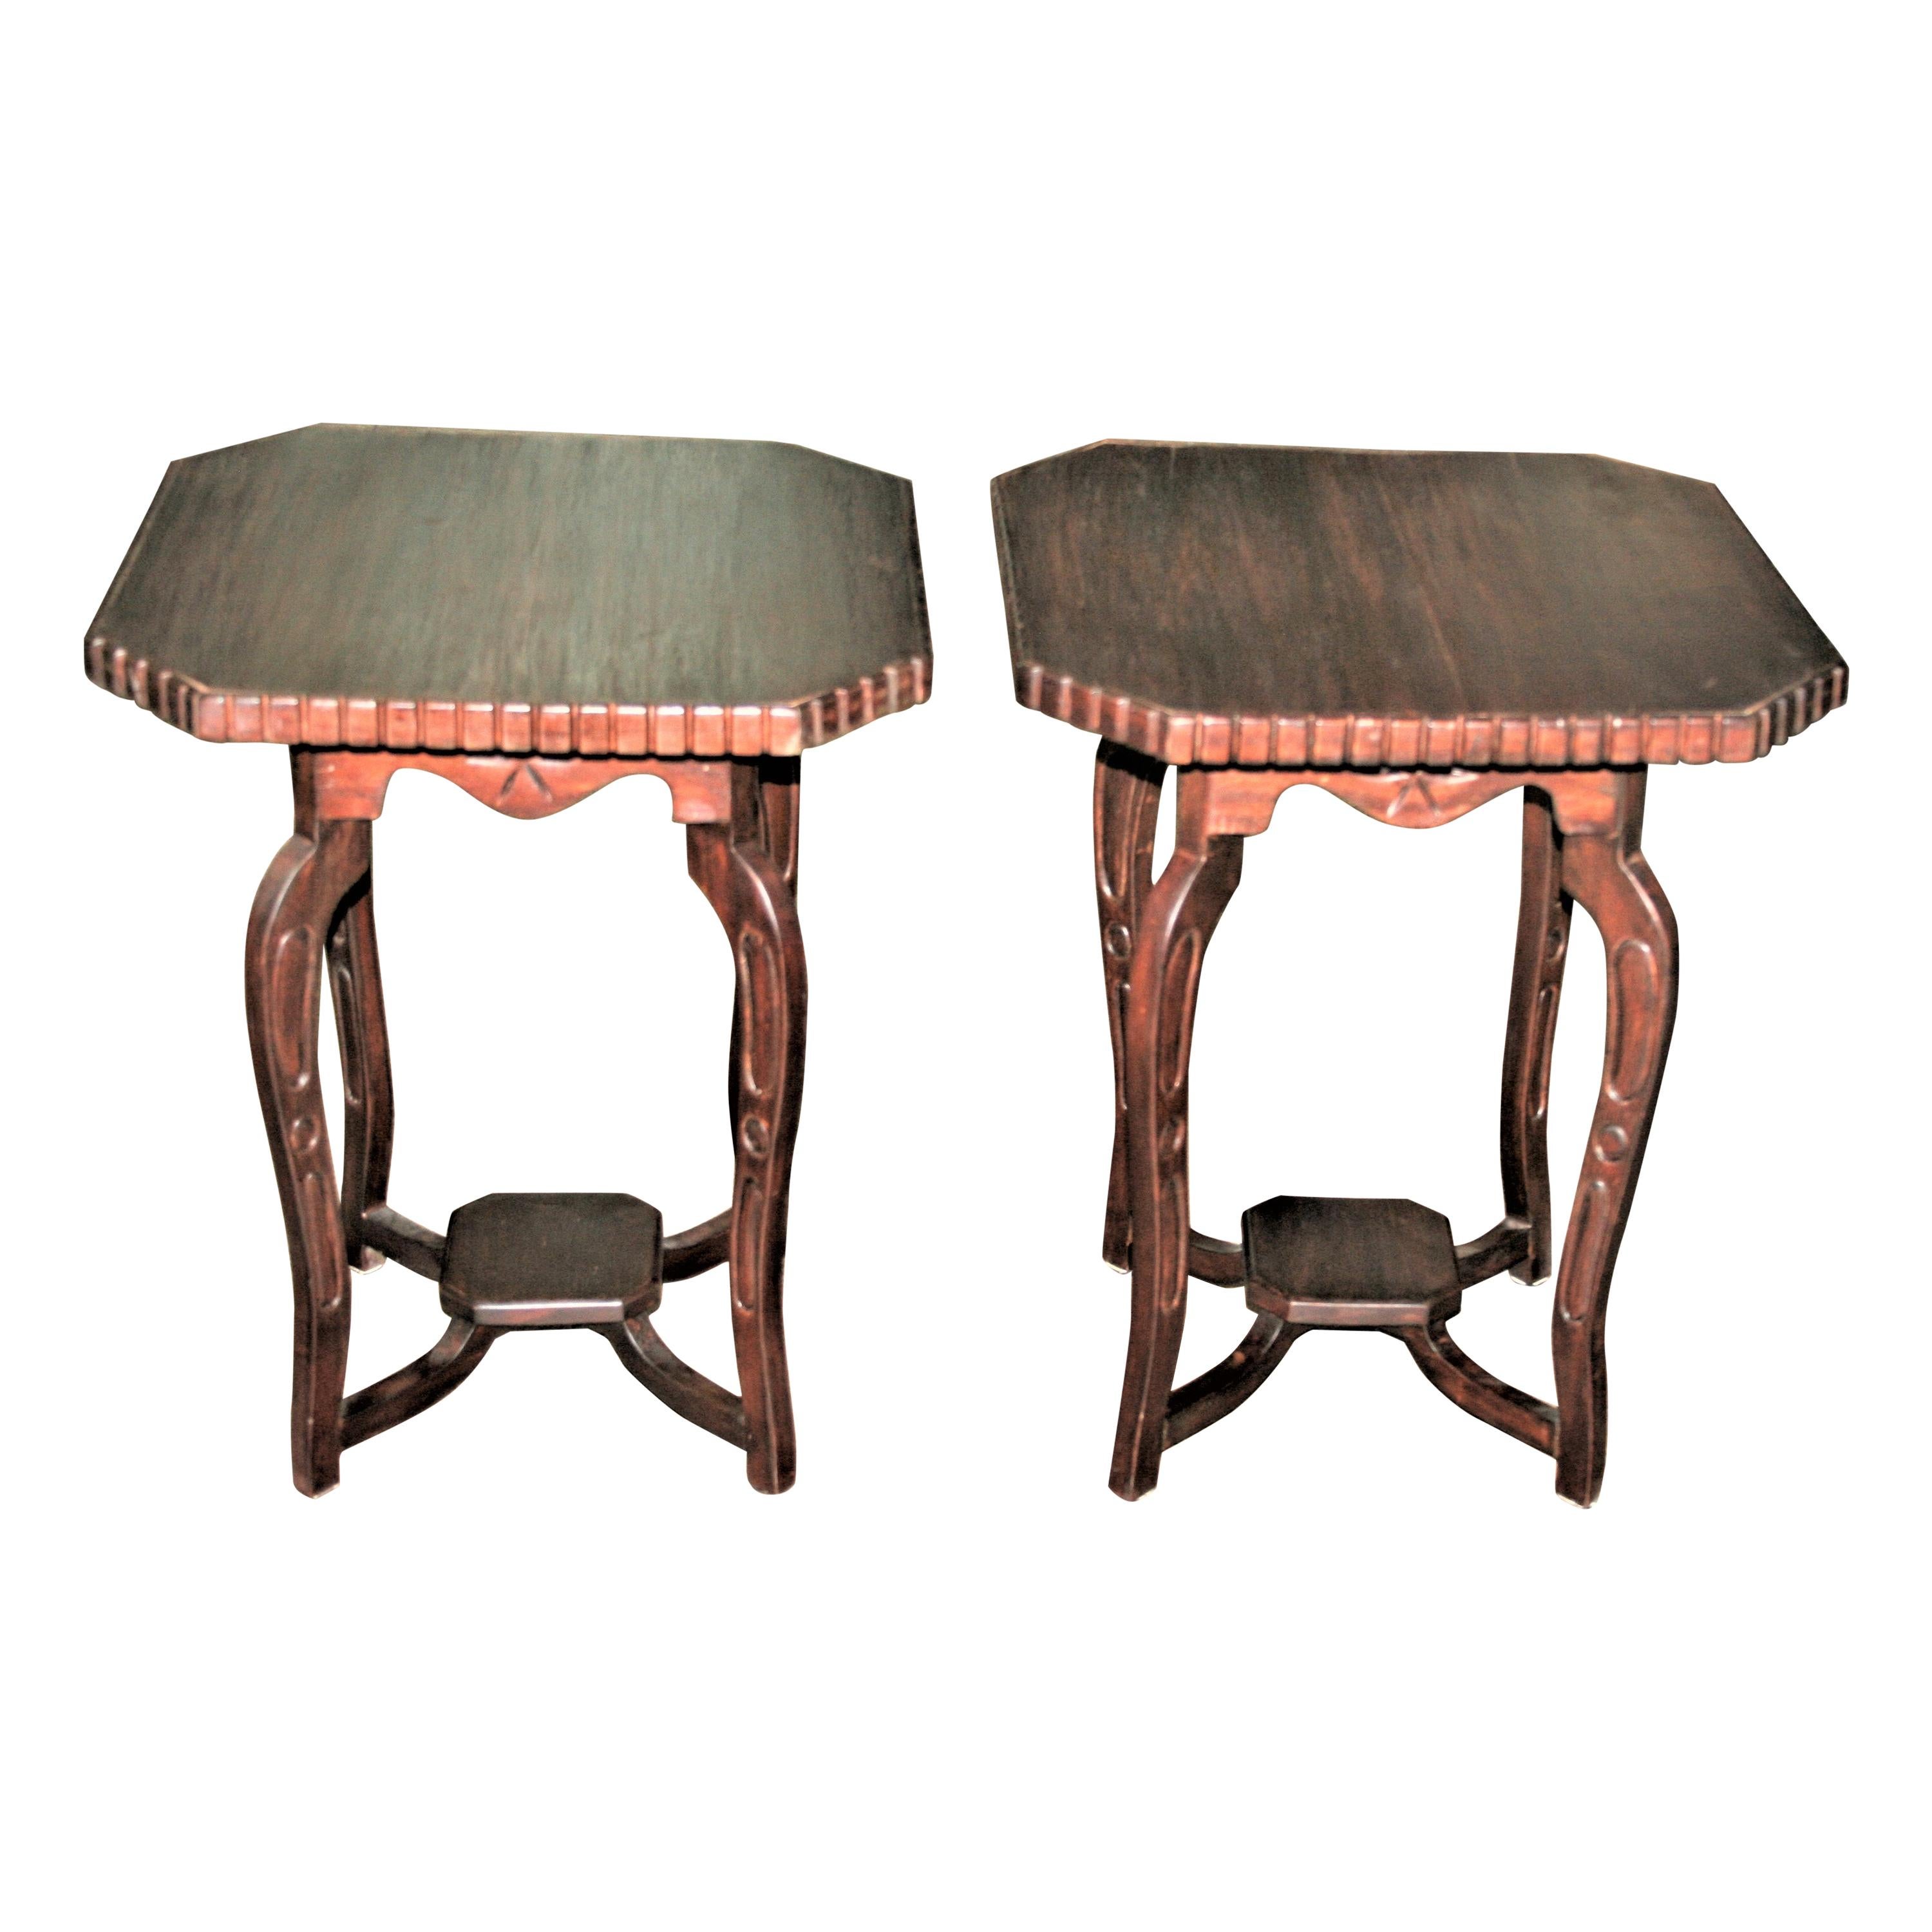 Pair of Early 20th Century Solid Nedun Wood Side Tables from Sri Lanka